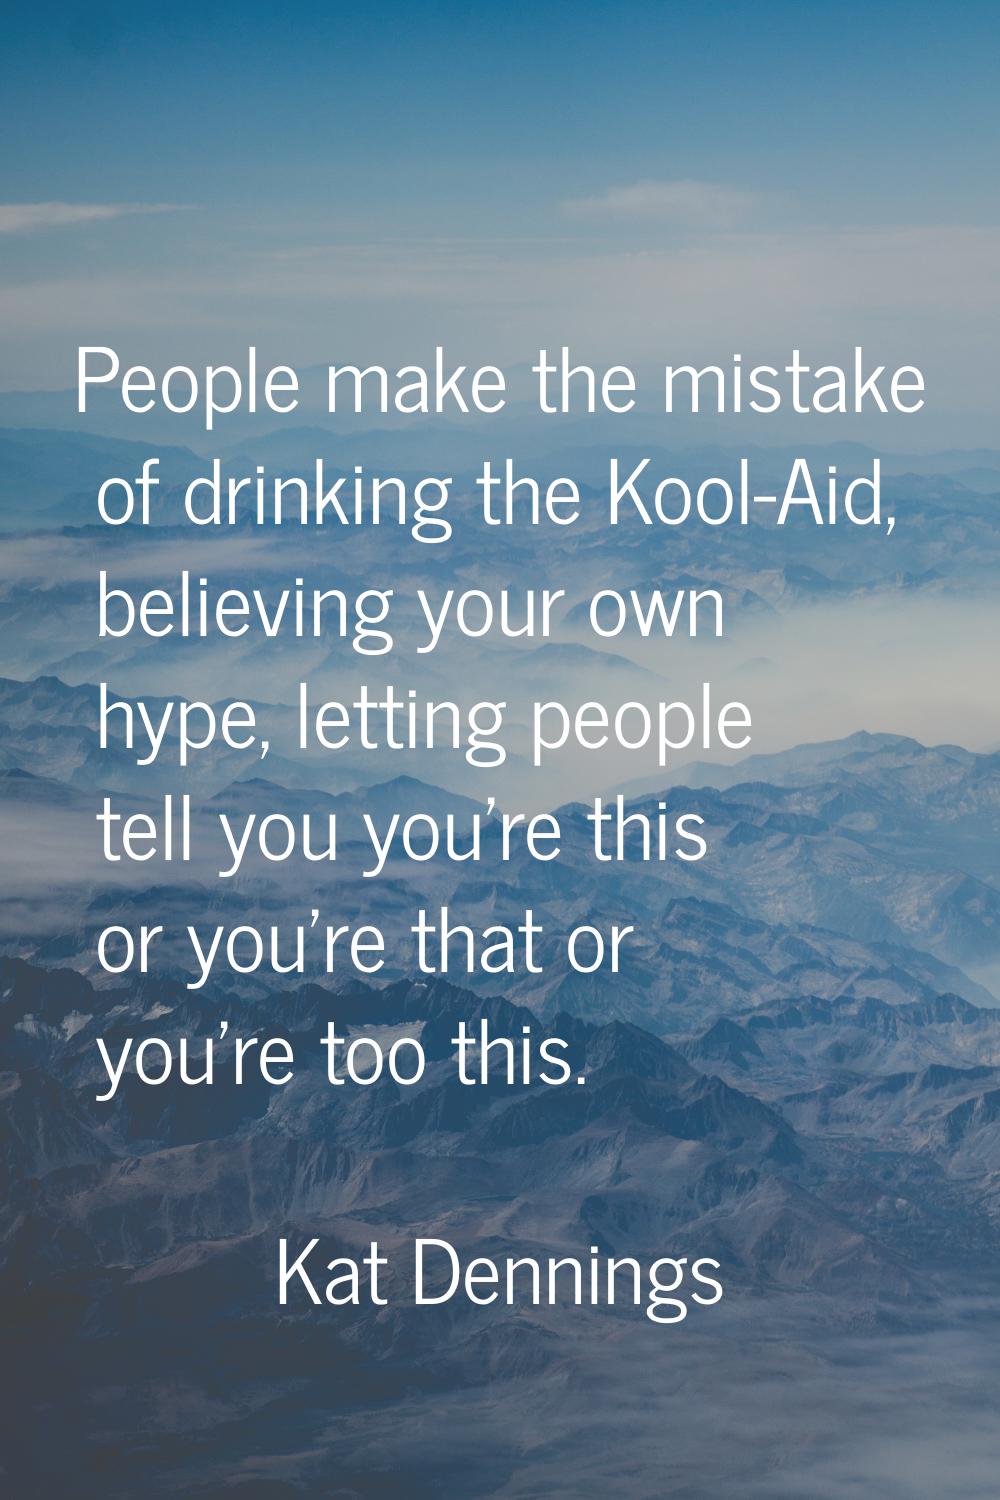 People make the mistake of drinking the Kool-Aid, believing your own hype, letting people tell you 